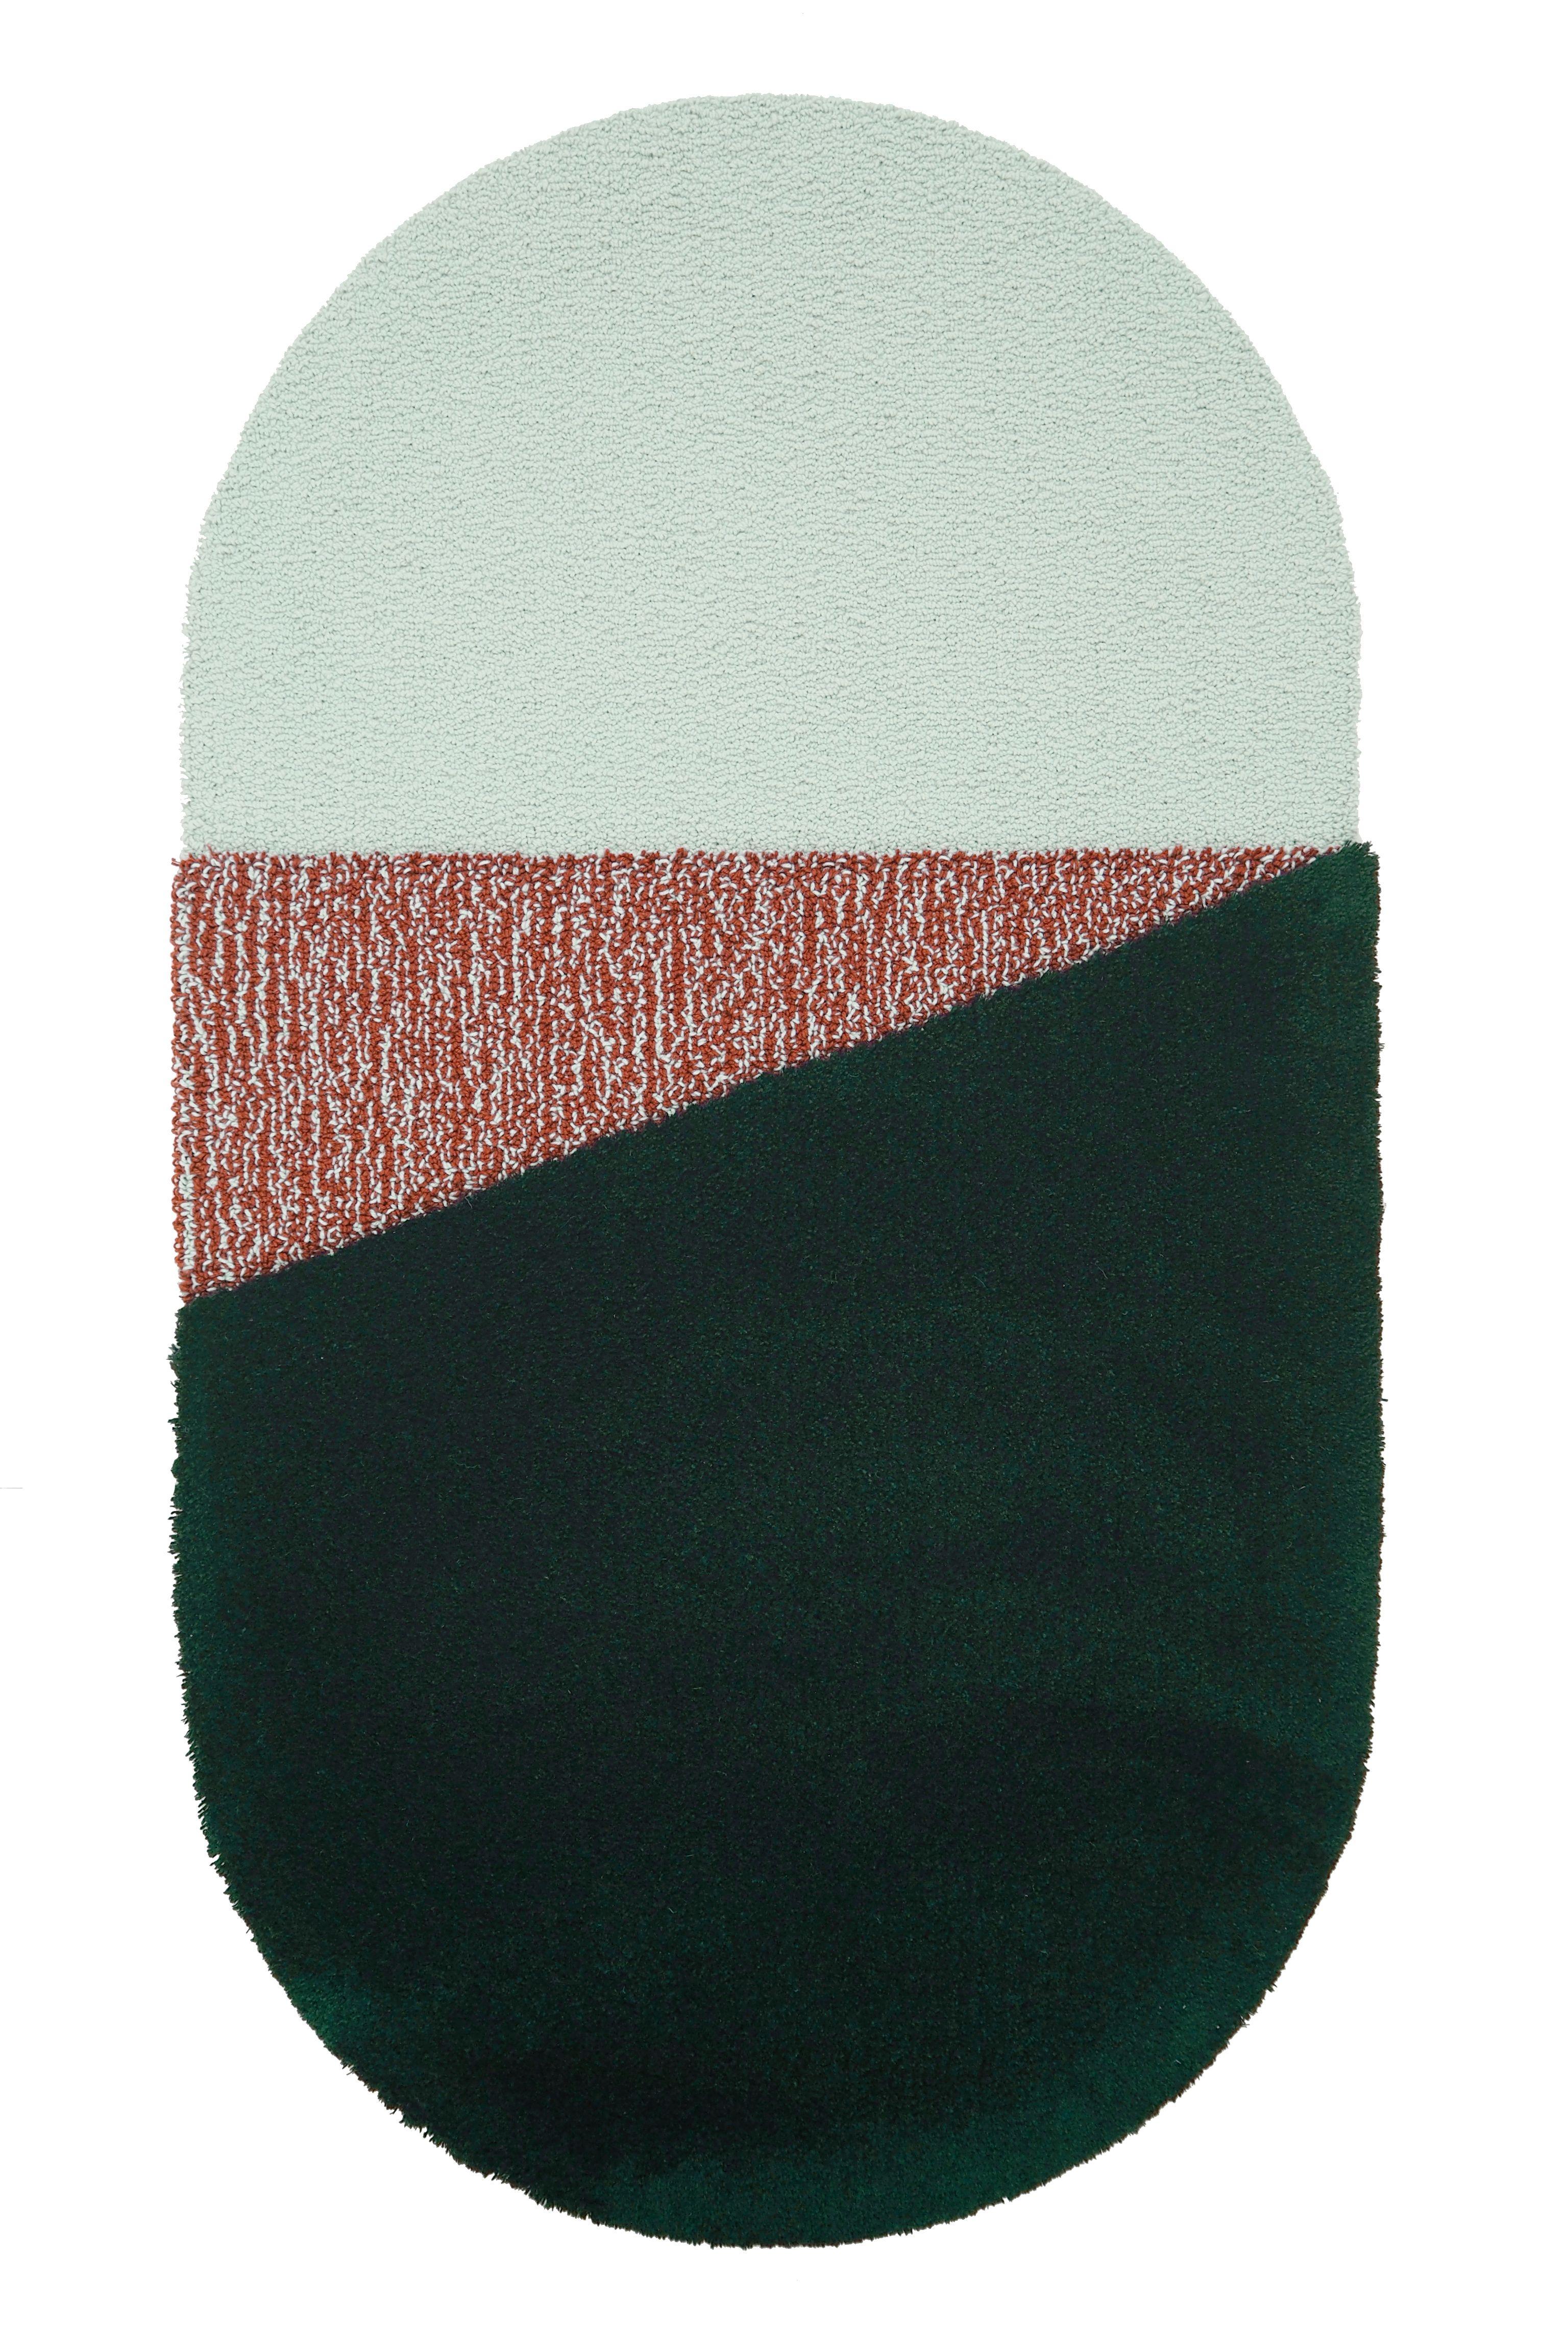 Modern OCI Triptych S, Composition of 3 Rugs 100% Wool /Green and Brick Gray by Portego For Sale